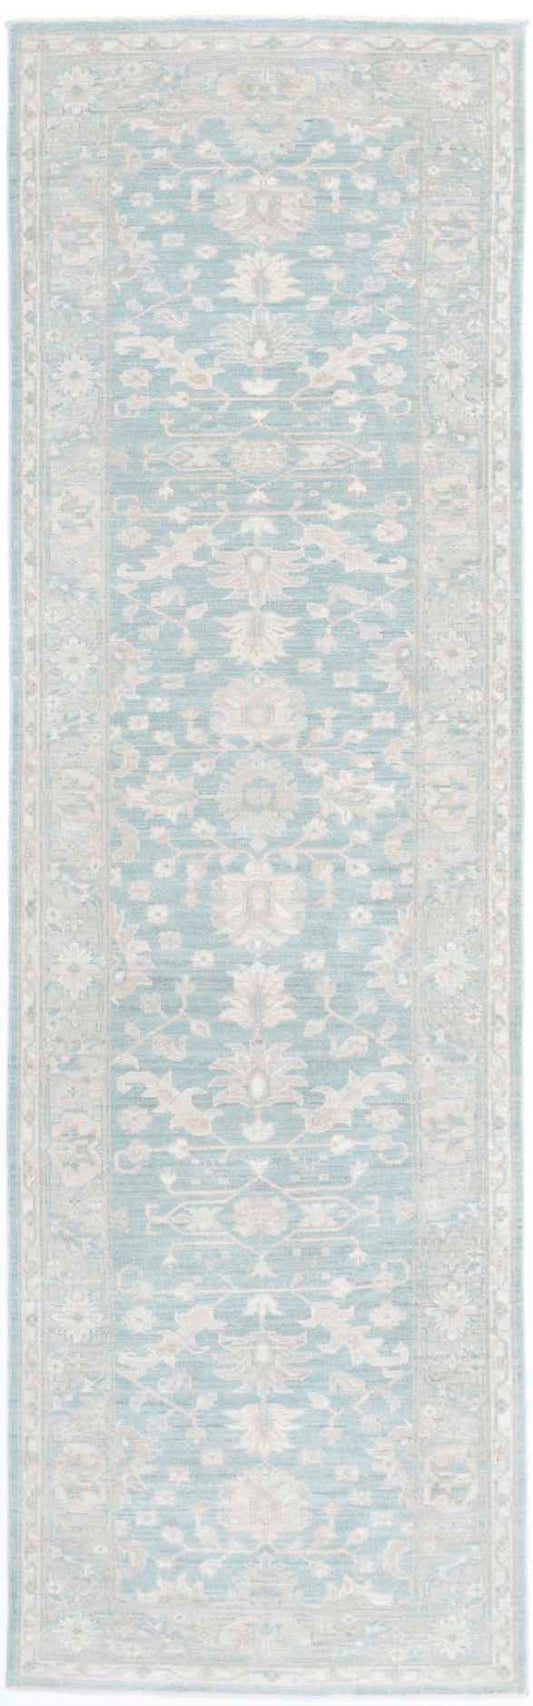 Traditional Hand Knotted Serenity Farhan Wool Rug of Size 2'7'' X 9'5'' in Teal and Grey Colors - Made in Afghanistan